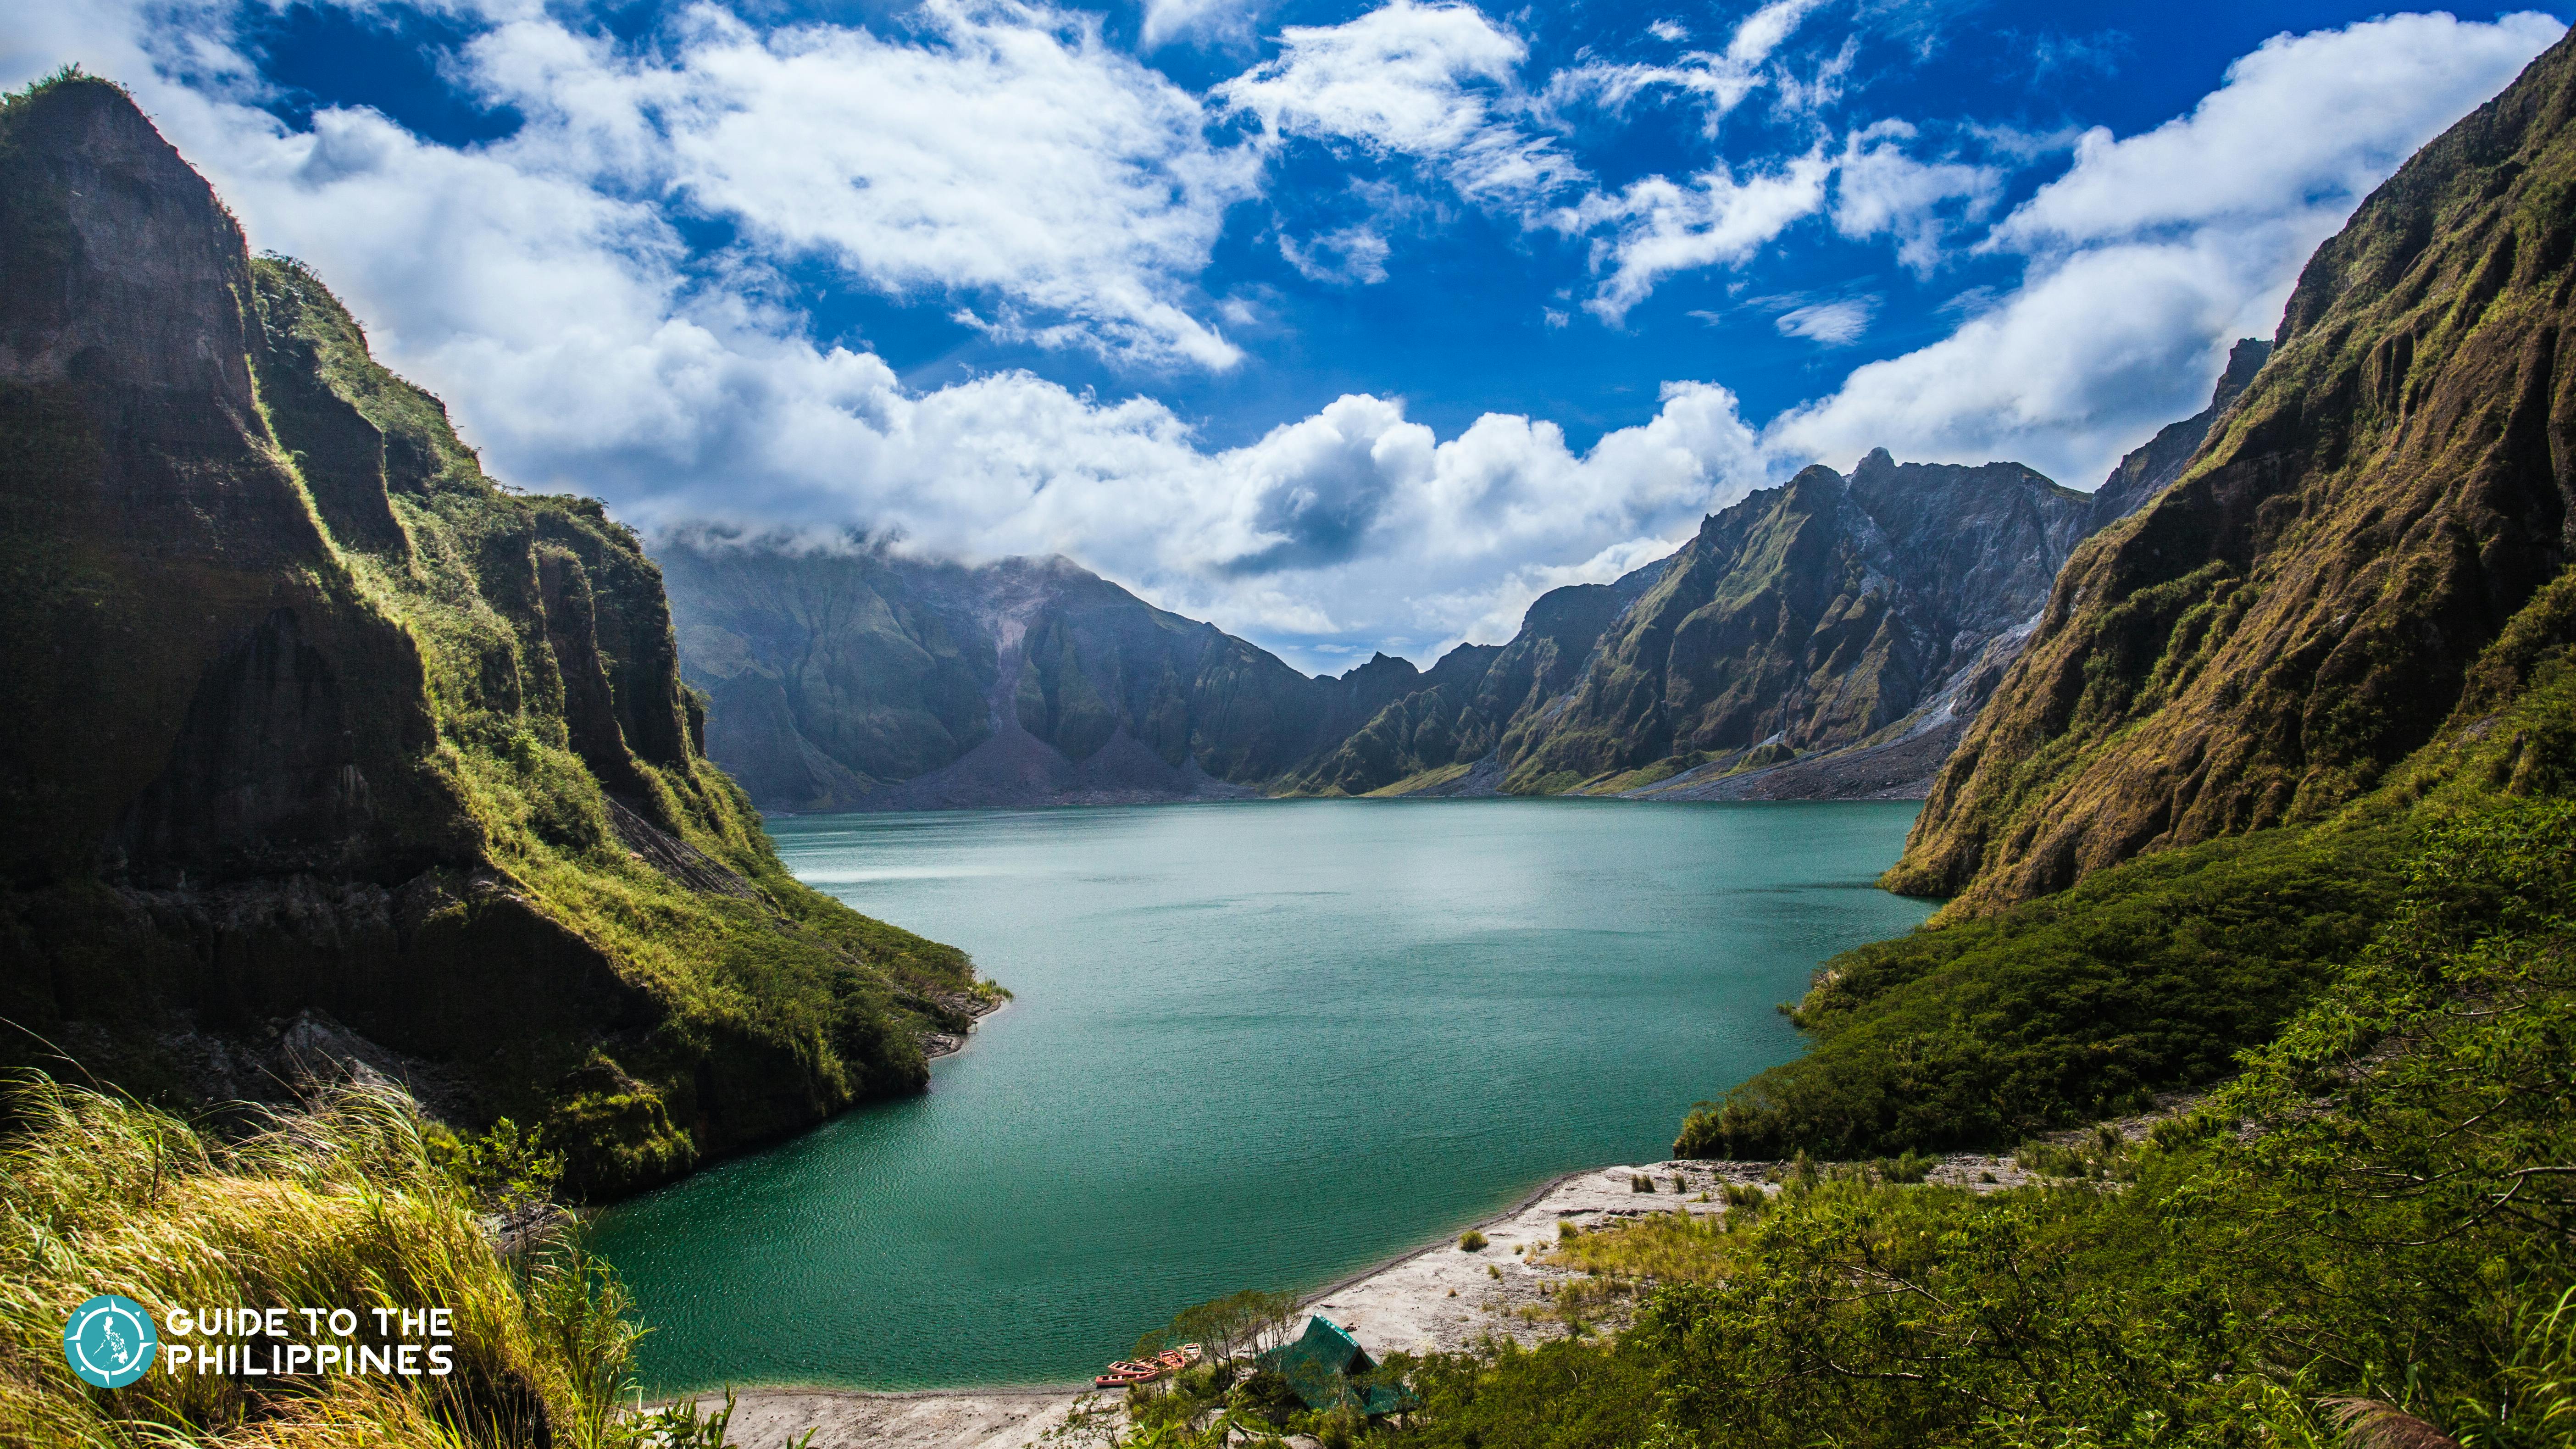 View of the Mt. Pinatubo Crater Lake